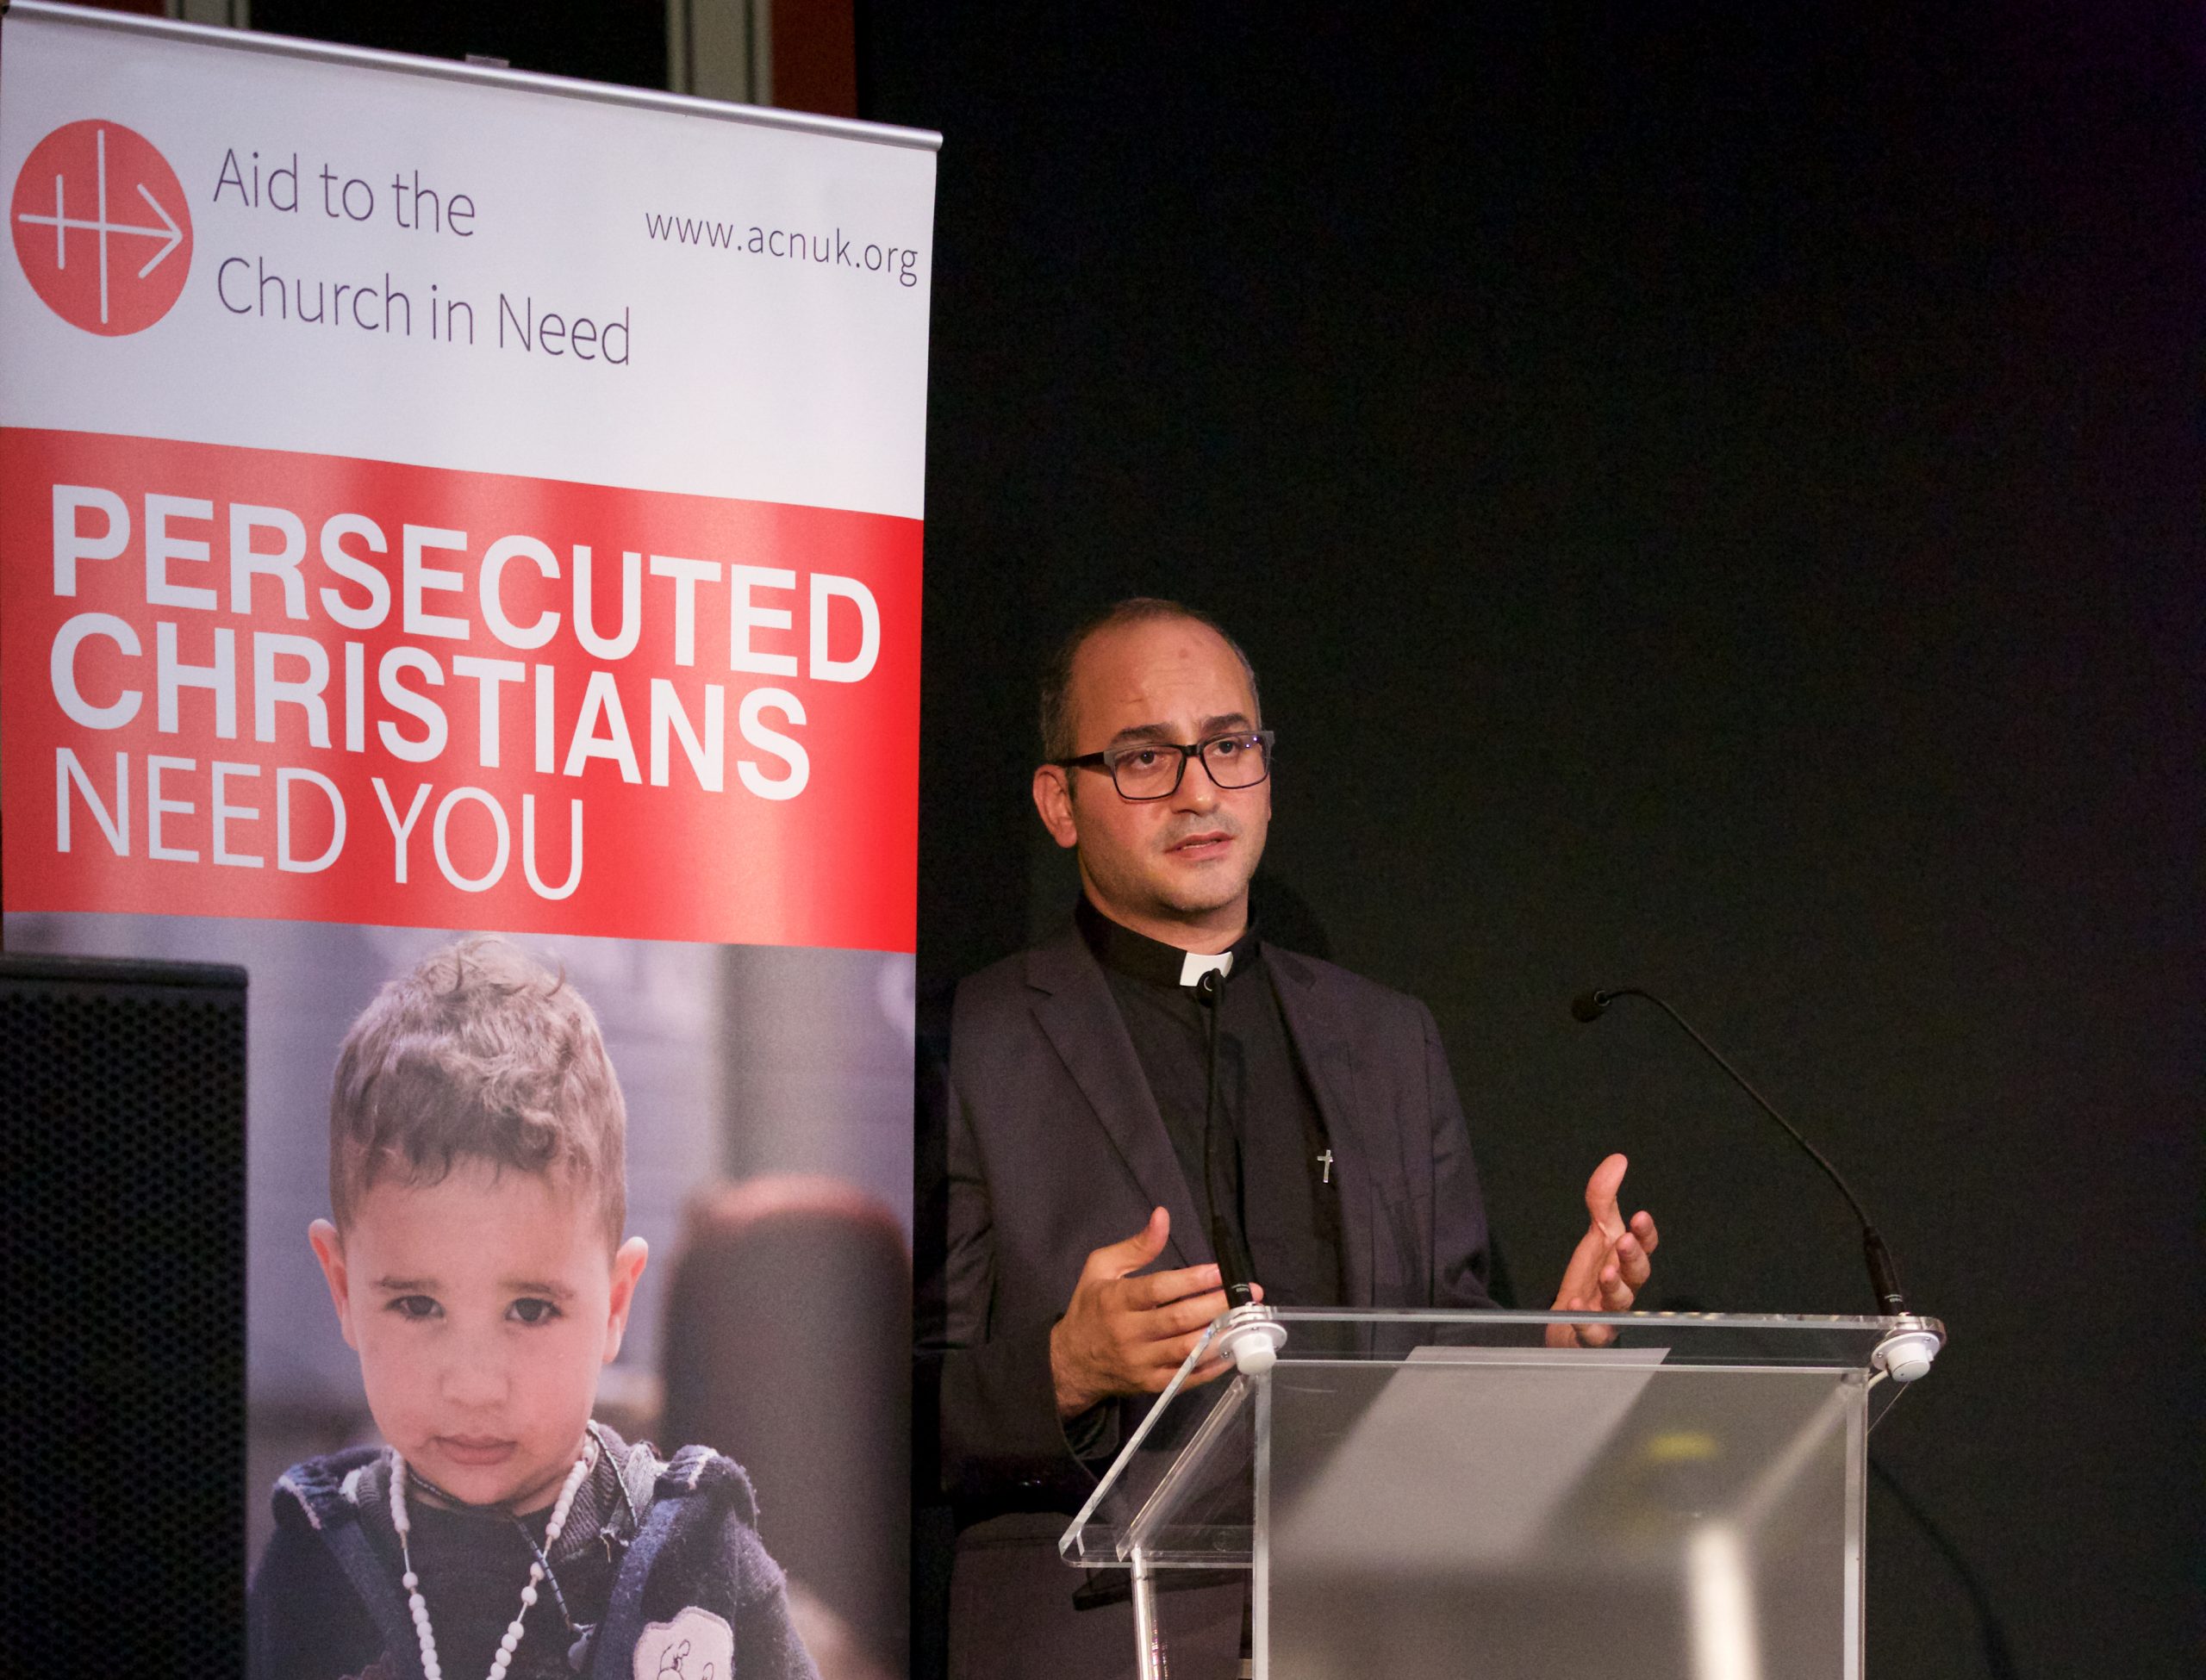 Father Salar Kajo, pictured speaking at ACN's Annual Event on the 14th October 2017 (© Weenson Oo/picture-u.net)